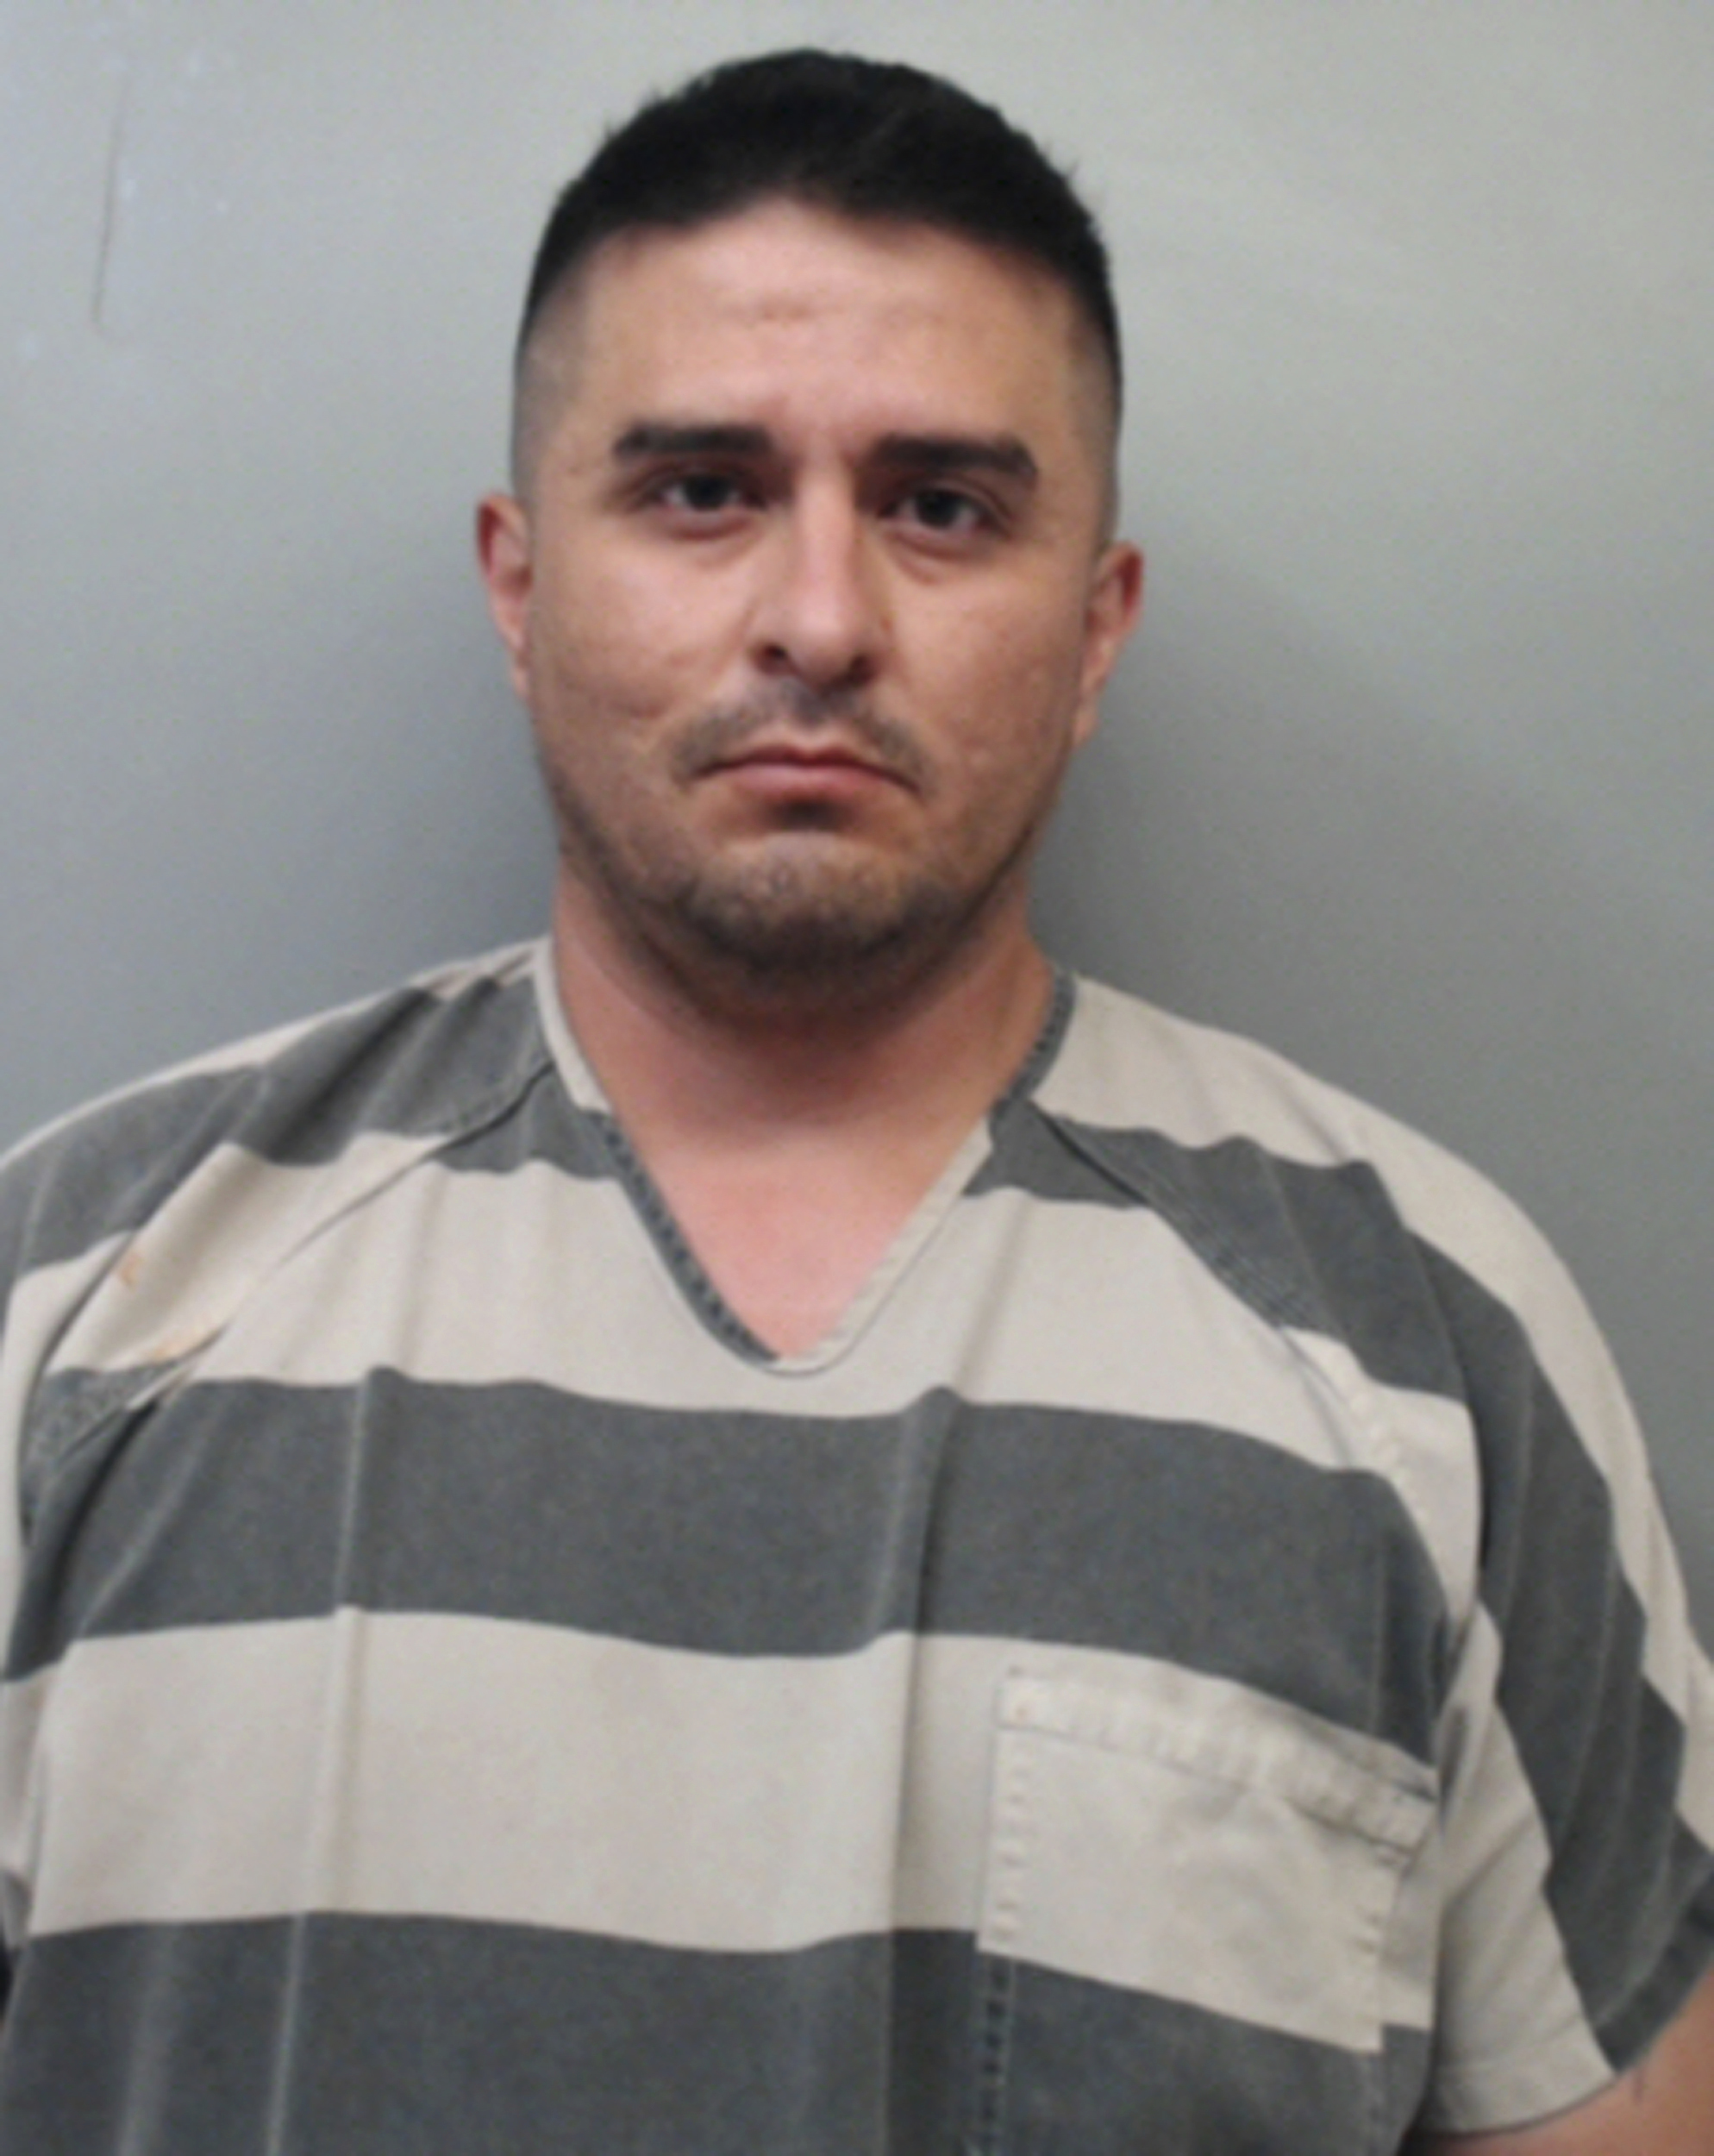 This image provided by the Webb County Sheriff’s Office shows Juan David Or...